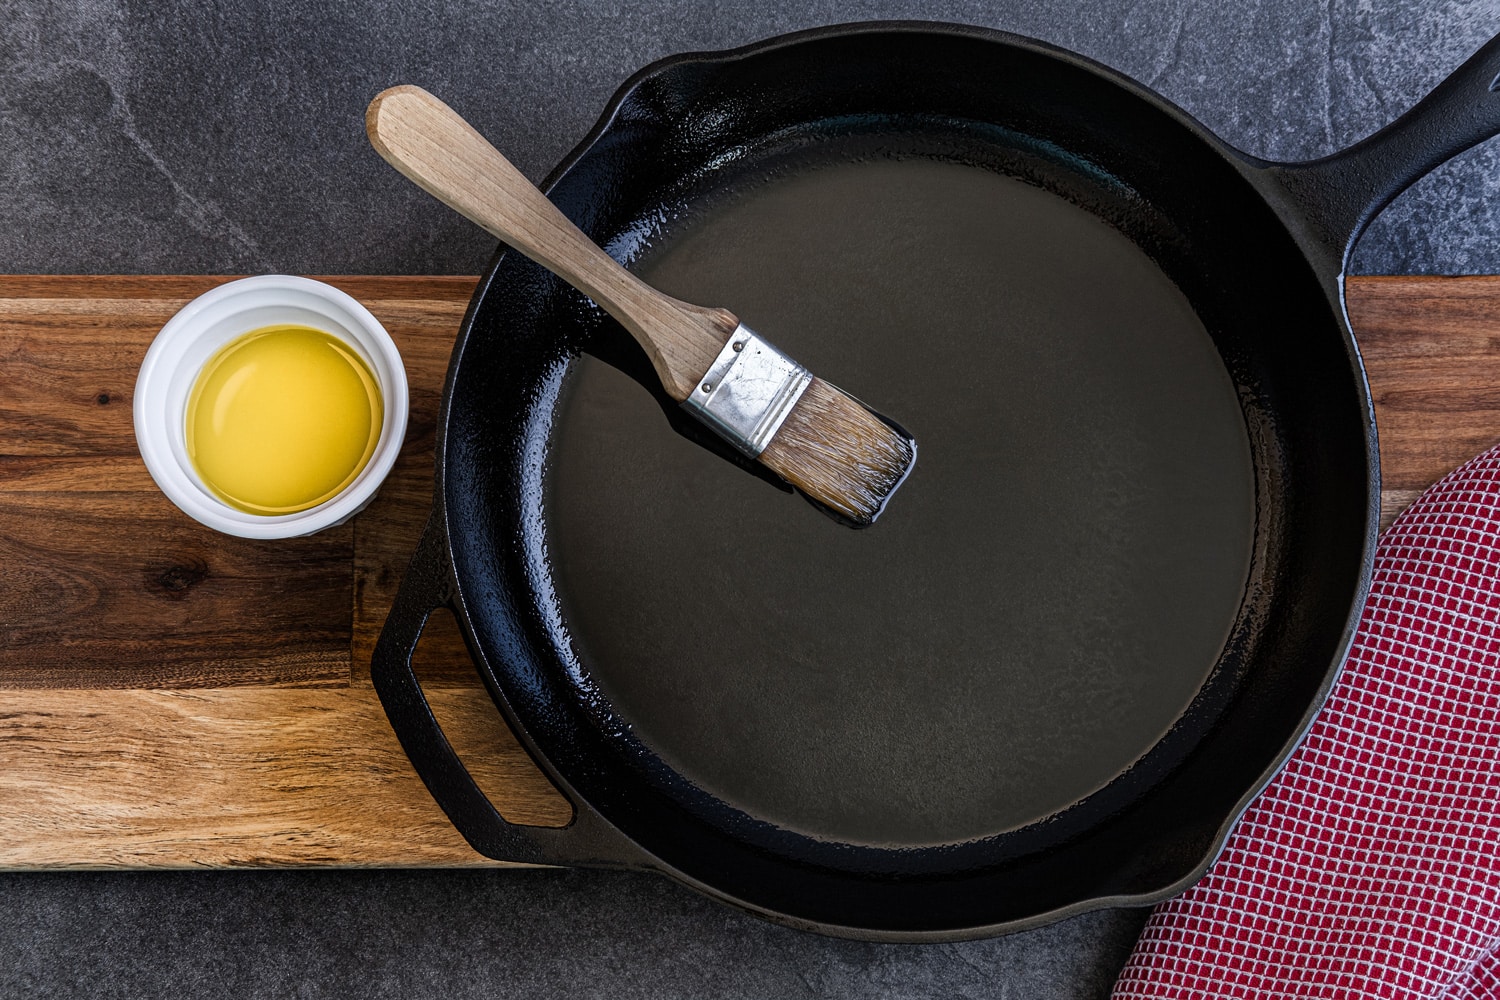 Cast iron skillet being brushed with olive oil to prevent sticking, on a slate countertop with a red dish towel